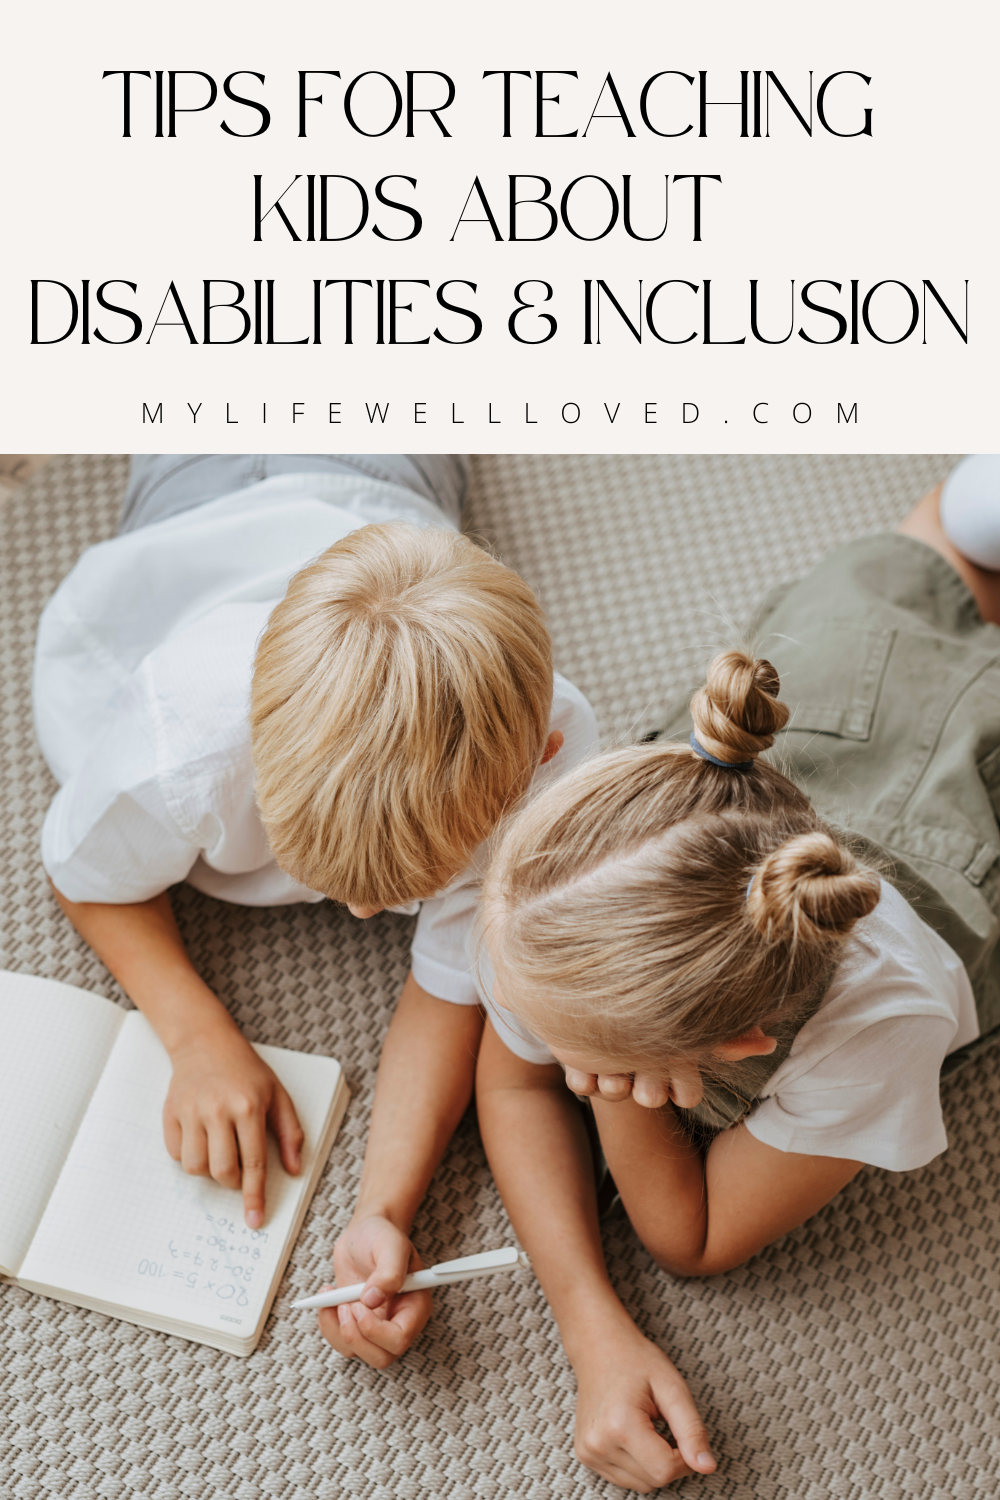 Christian Birmingham podcaster, boy mom, & health coach, Heather Brown, shares tips on teaching kids about disabilities, inclusion, and acceptance.